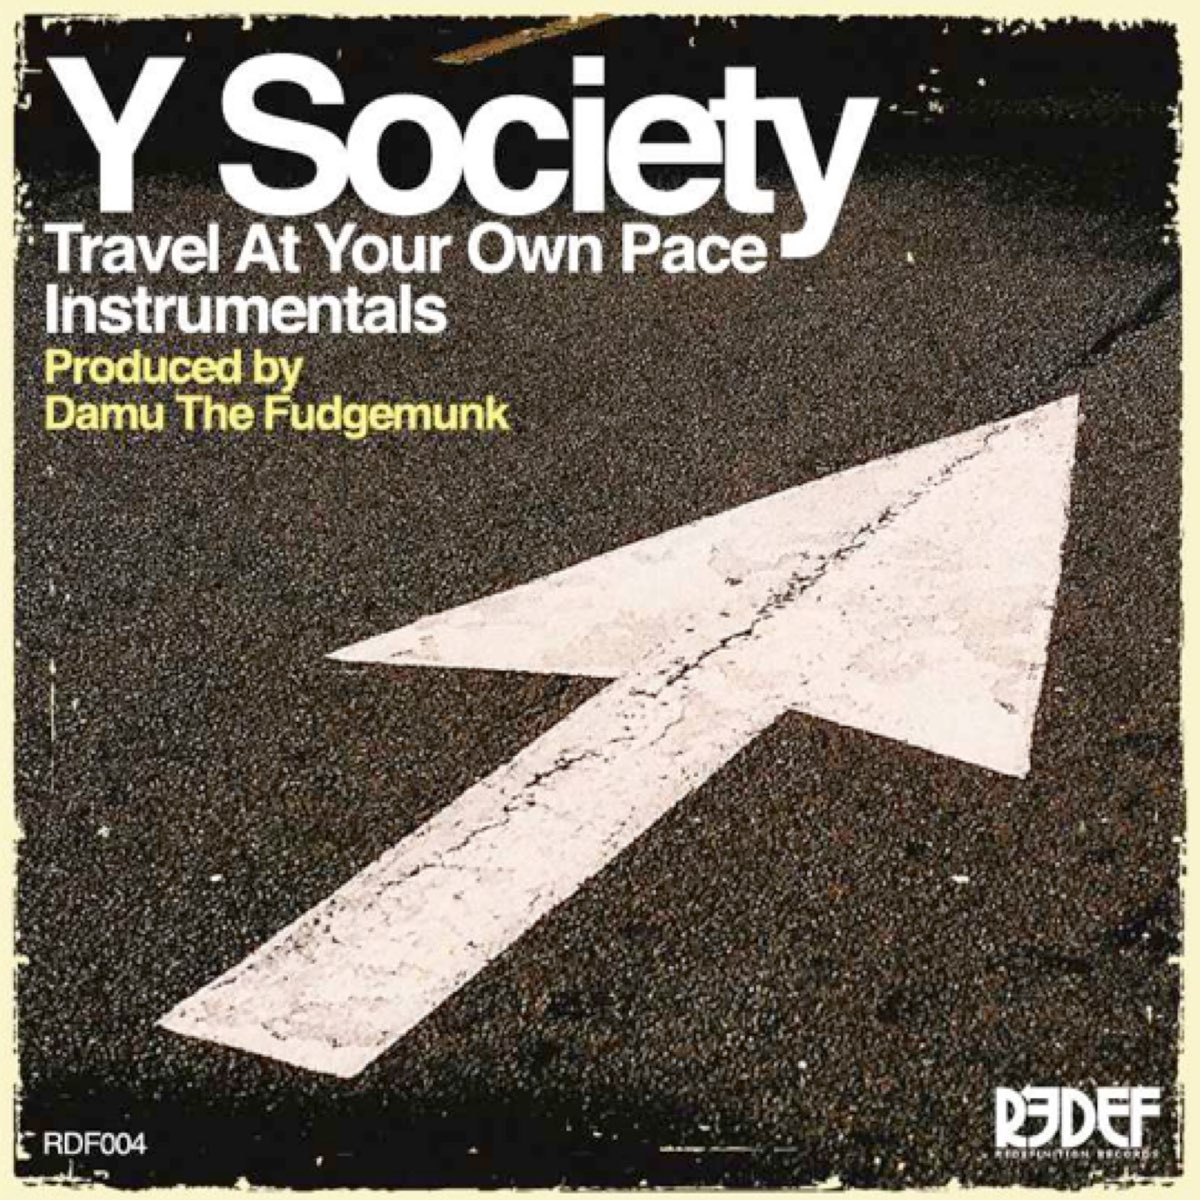 Travel at your own Pace y Society. Go at your own Pace. Damu the Fudgemunk. Go at your own Pace Crop.